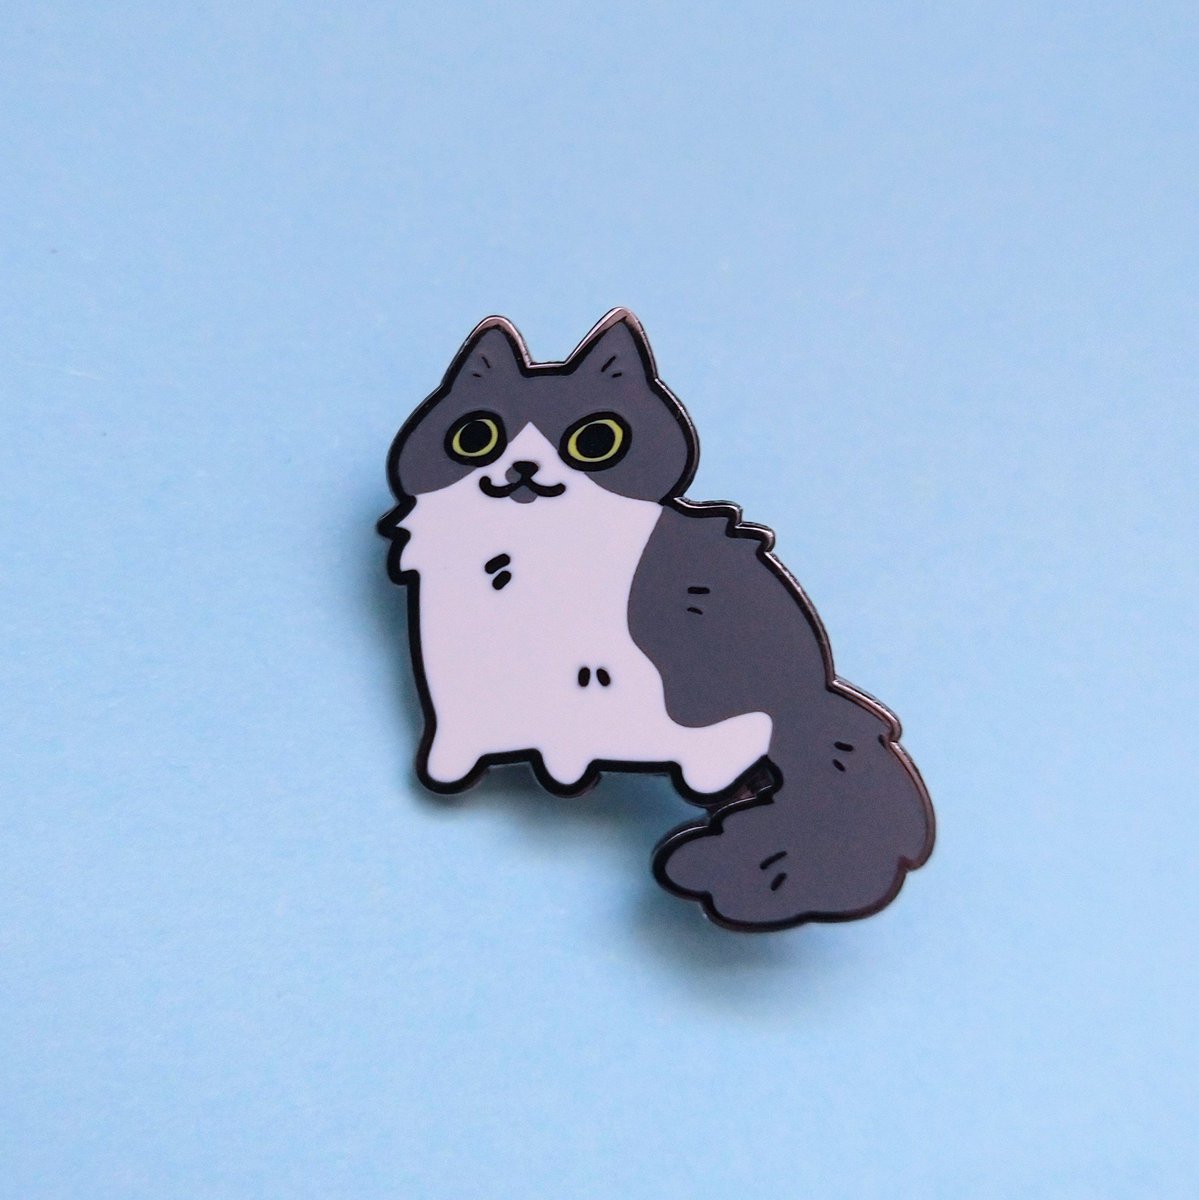 「New cat pins releasing today 😊🐾 」|Crow 🌱 Promise Garden!のイラスト